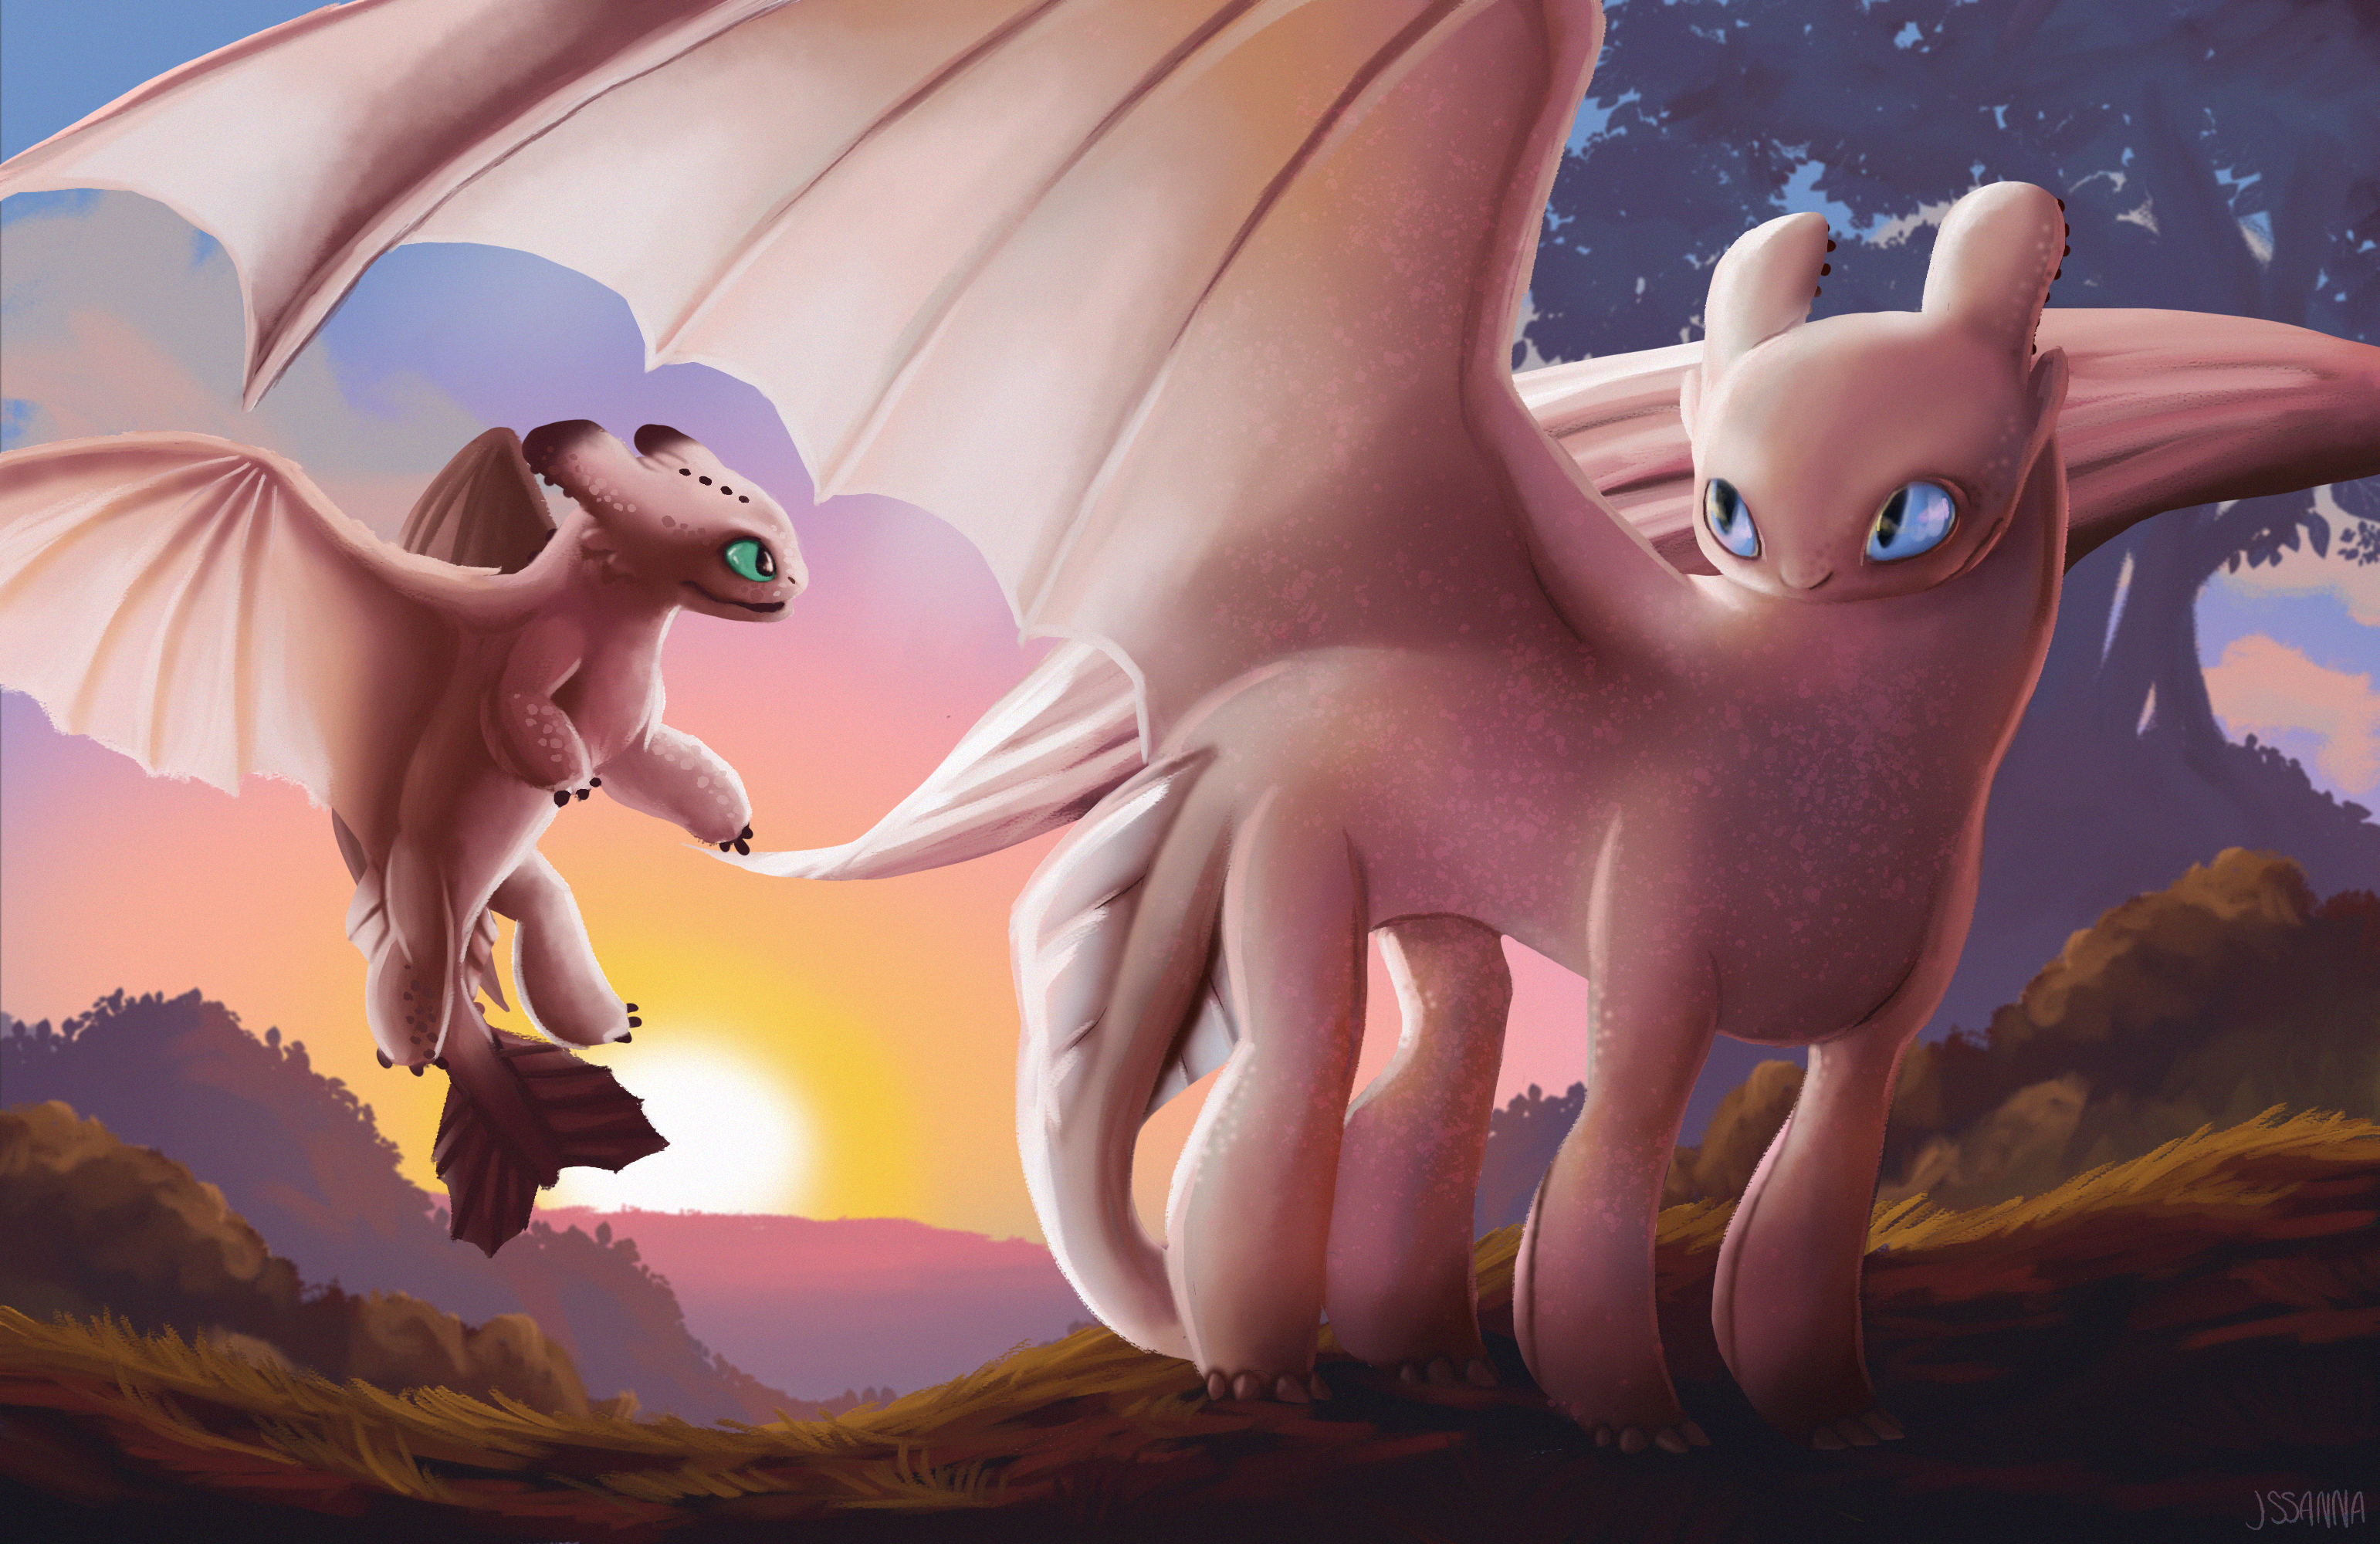 Light And Her Night How To Train Your Dragon By Jssannart On Deviantart